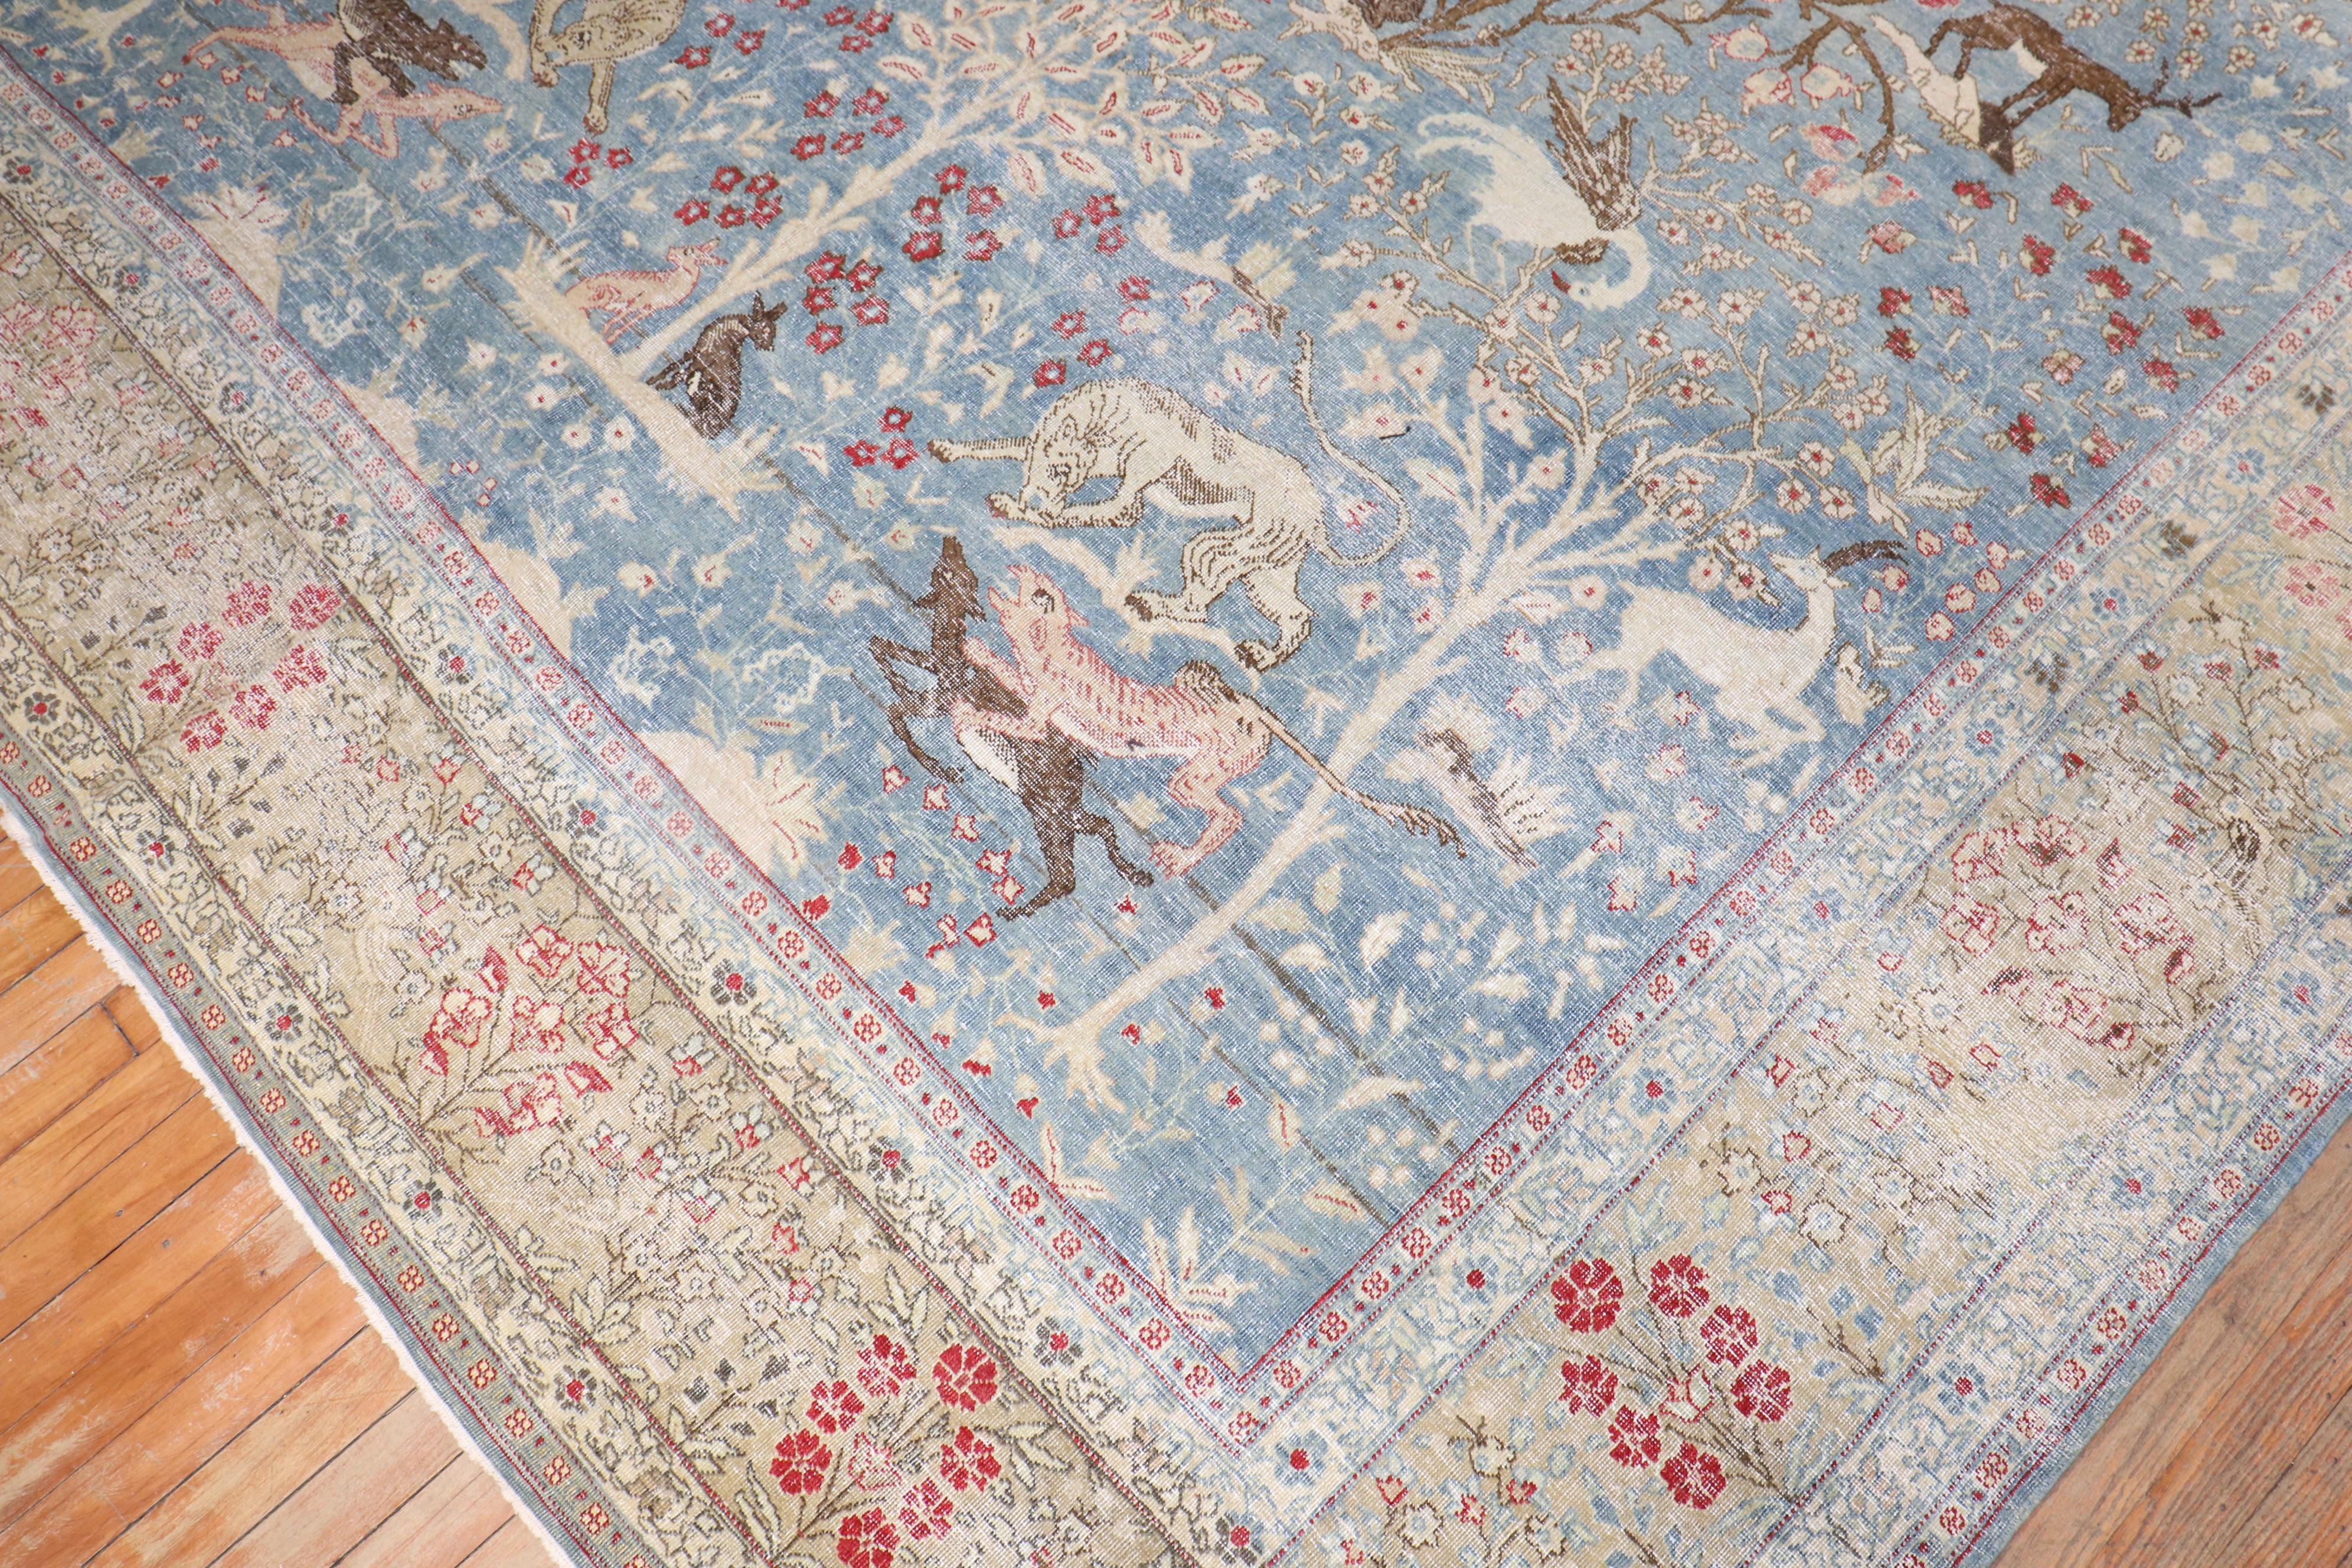 Large room-size antique Persian Tabriz rug featuring a formal Pictorial Animal Hunting Pattern from the 1st quarter of the 20th Century

Measures: 9'3'' x 13'5''